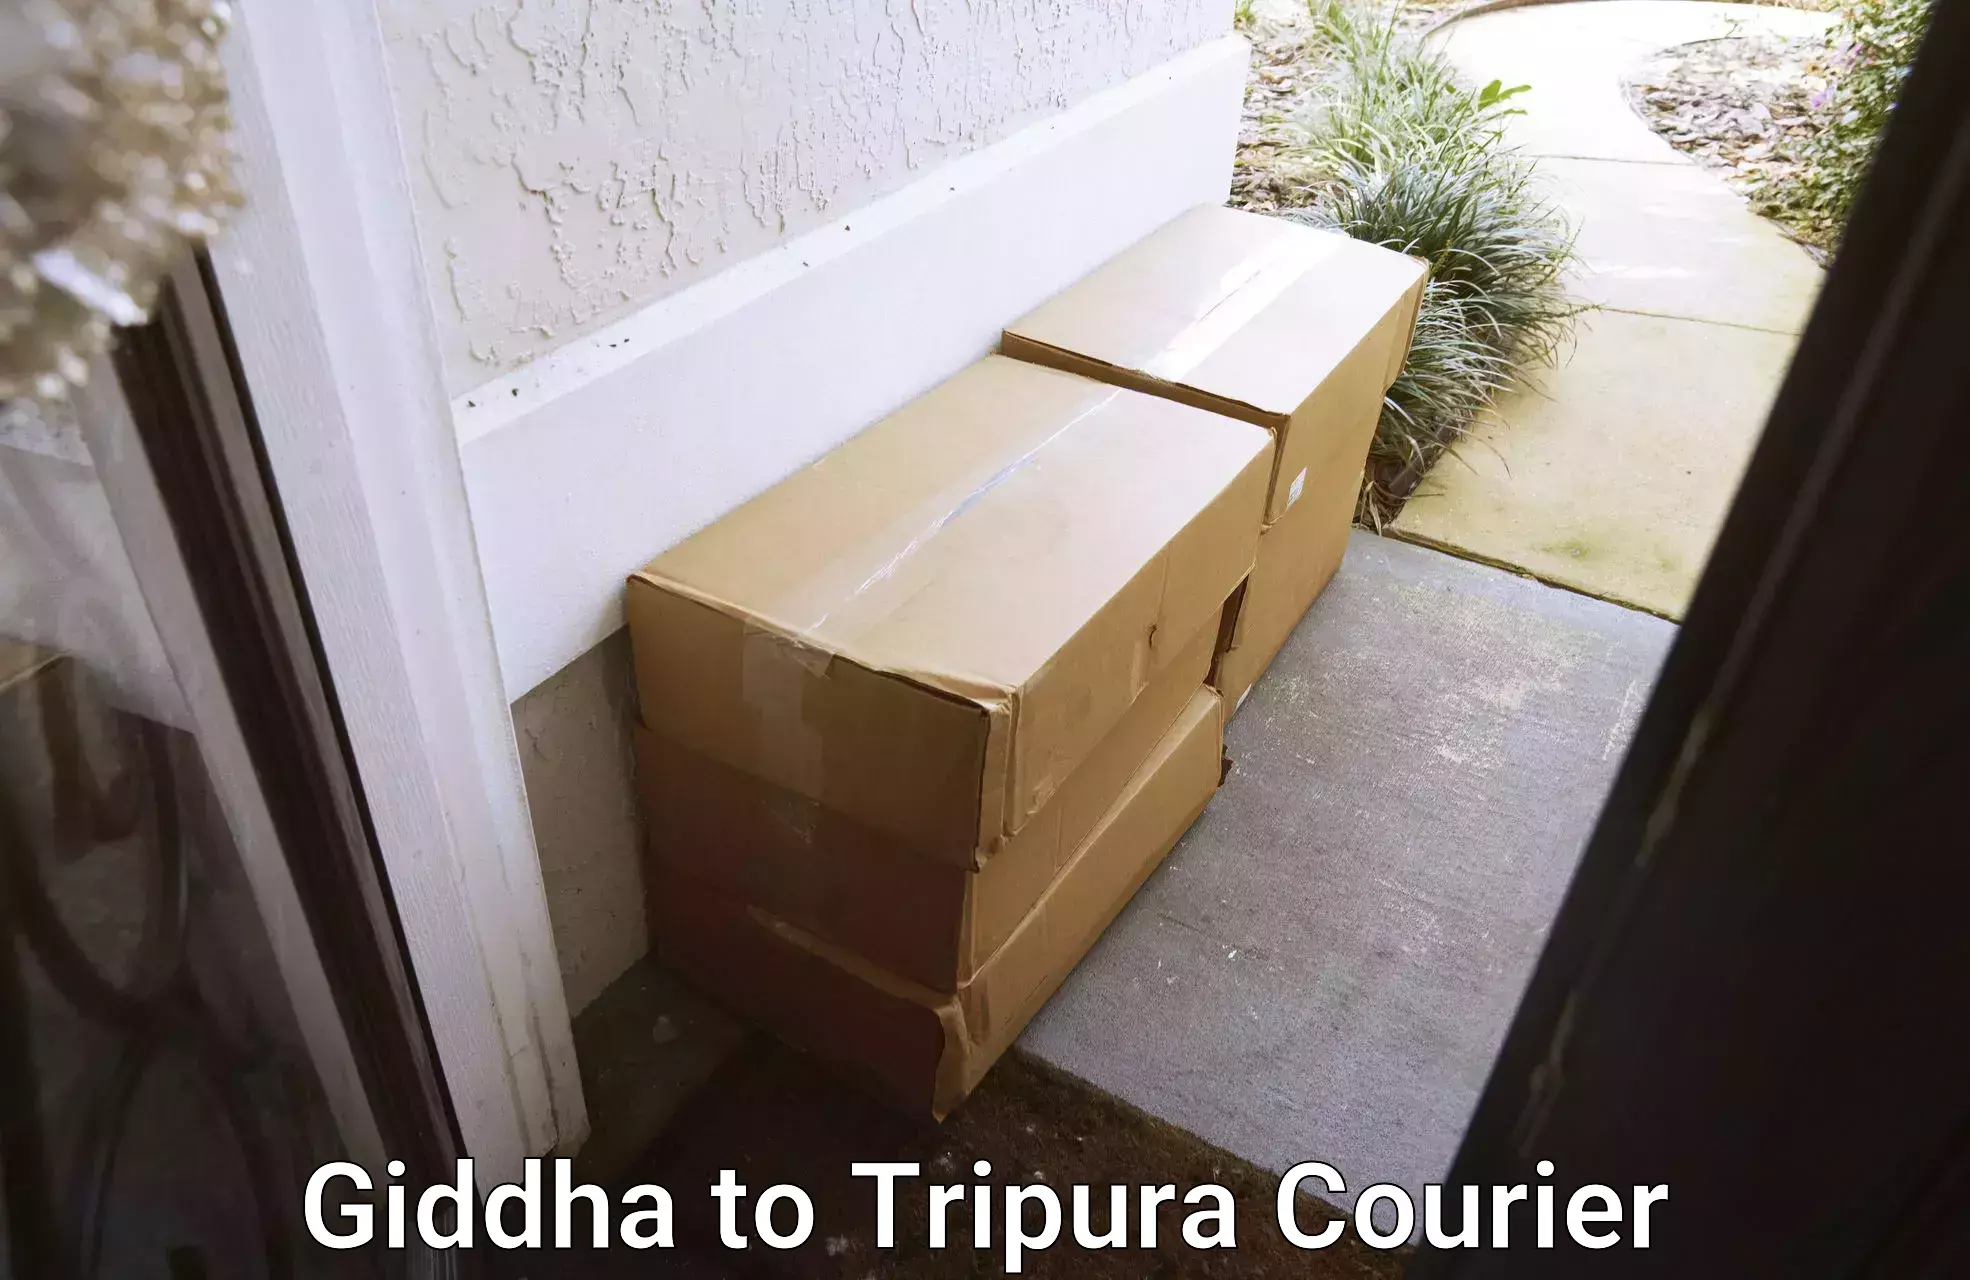 Expert packing and moving Giddha to Udaipur Tripura